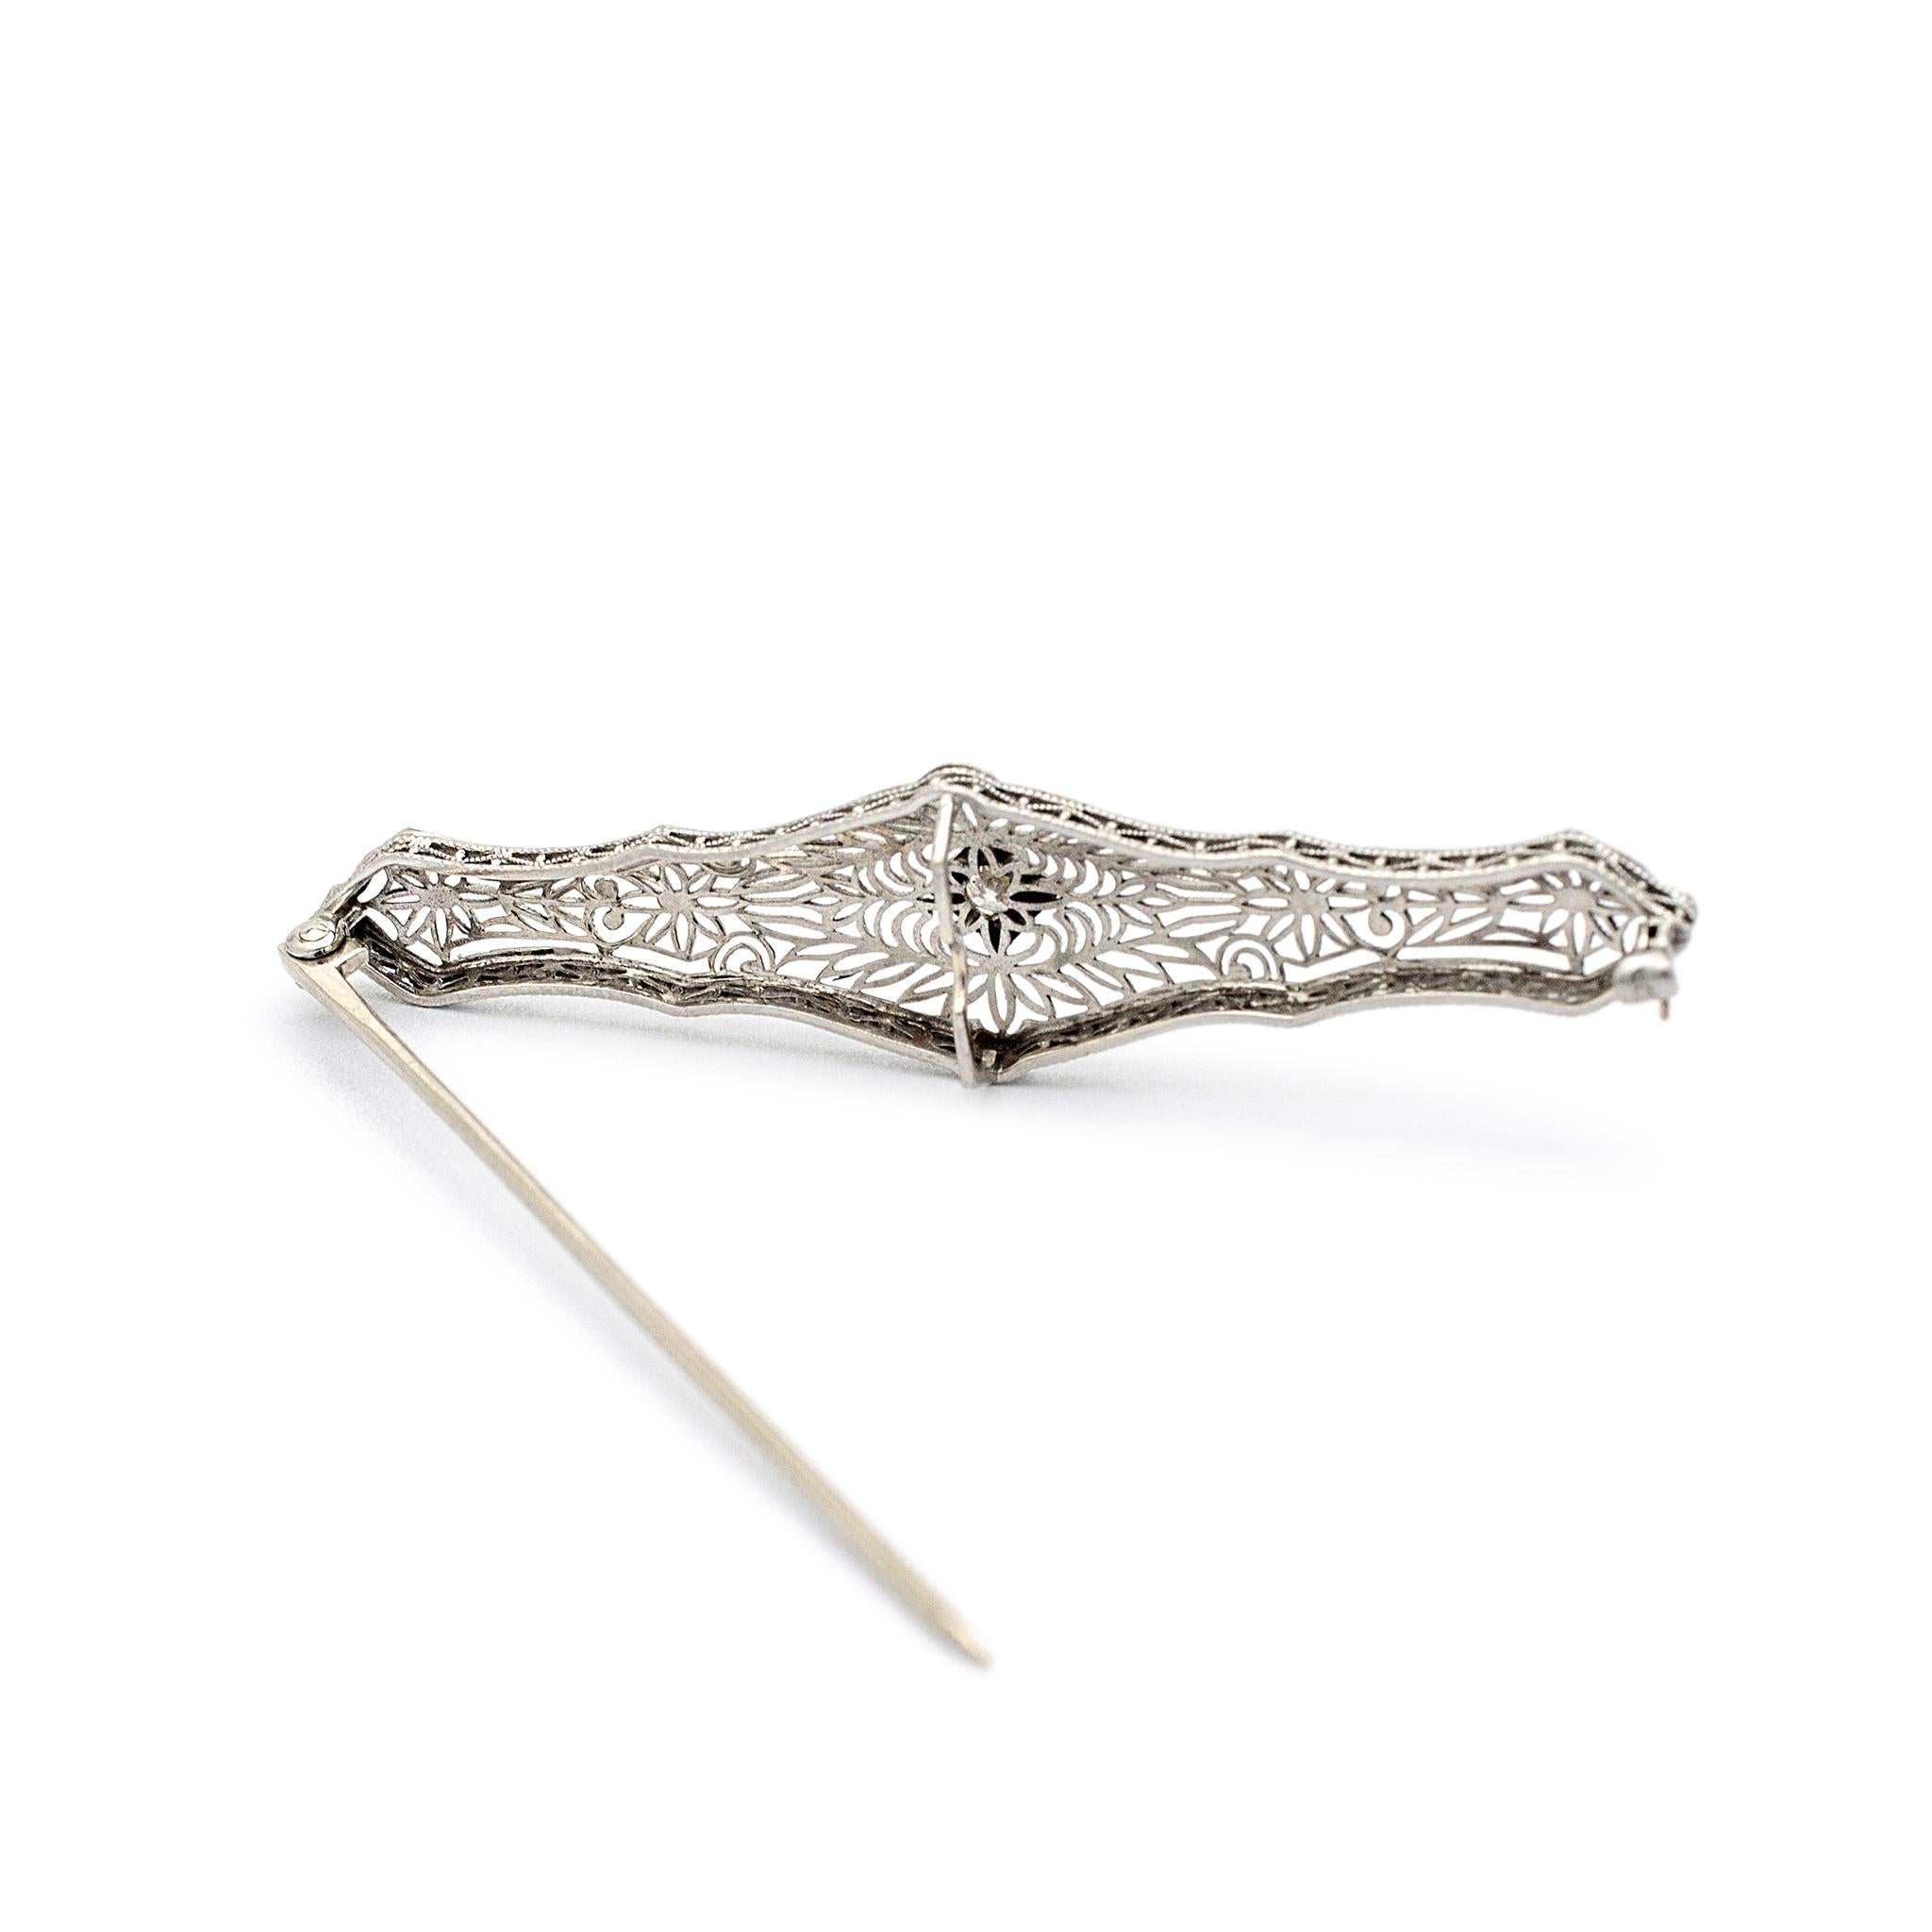 Gender: Ladies

Metal Type: Platinum & 14K White Gold 

Length: 2.25 inches 

Width: 14.40 mm 

Weight: 4.11 grams

Ladies 14K white gold and platinum diamond vintage brooch.  Engraved with 